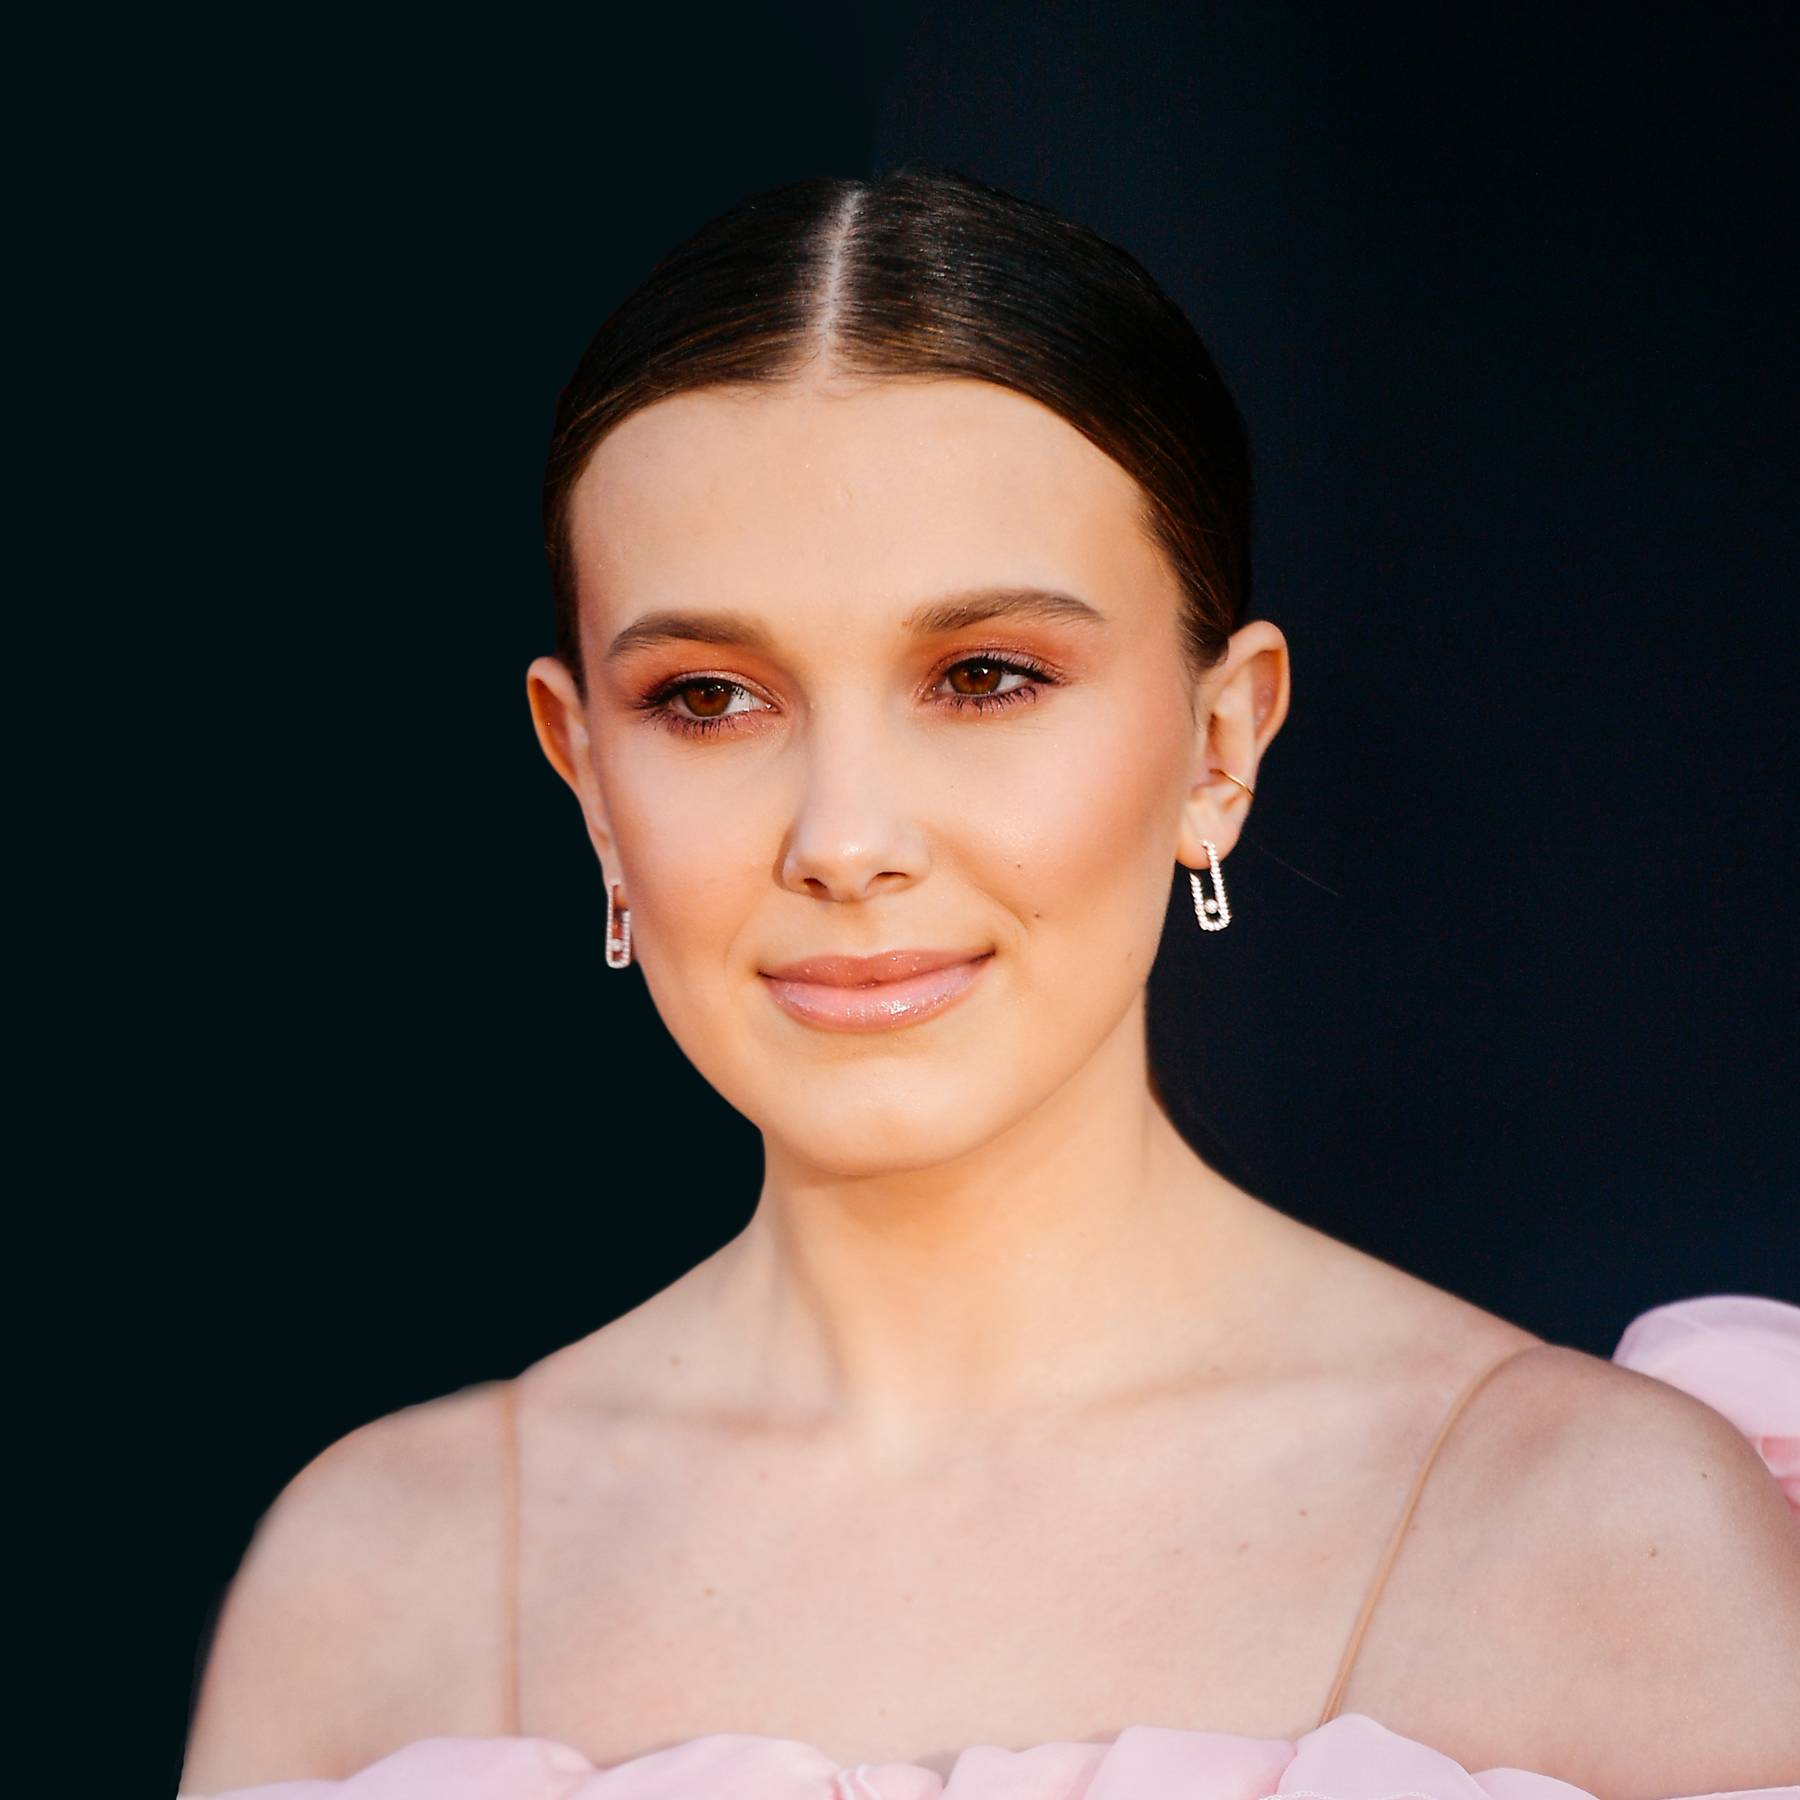 Millie Bobby Brown Is Launching Her Own Beauty Brand For Gen Z ...